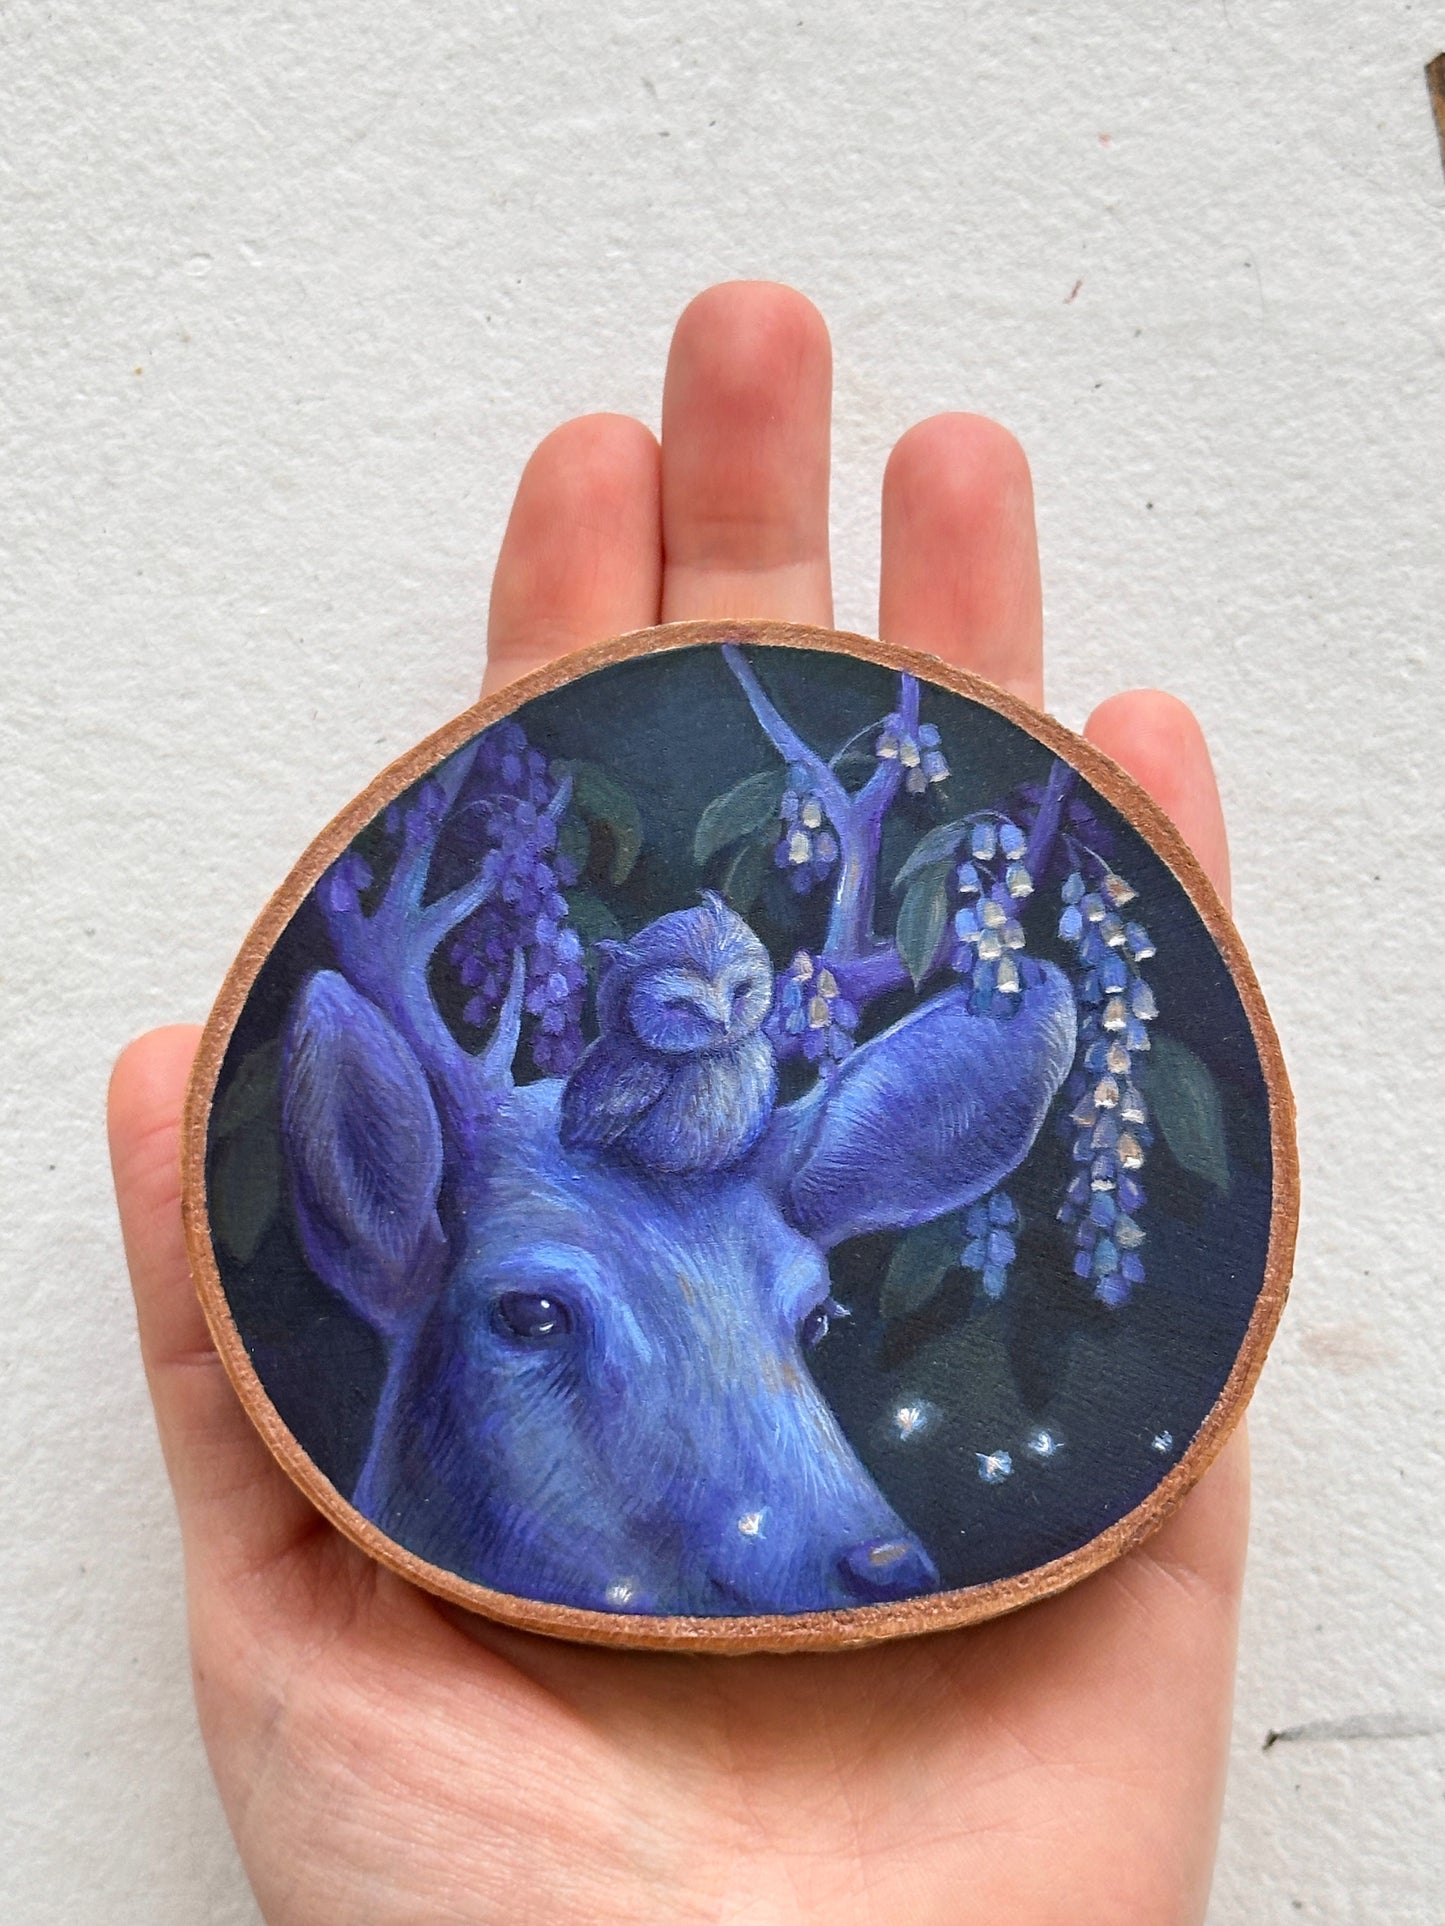 "Forest Friends and Fairy Lights” | Original painting on birch